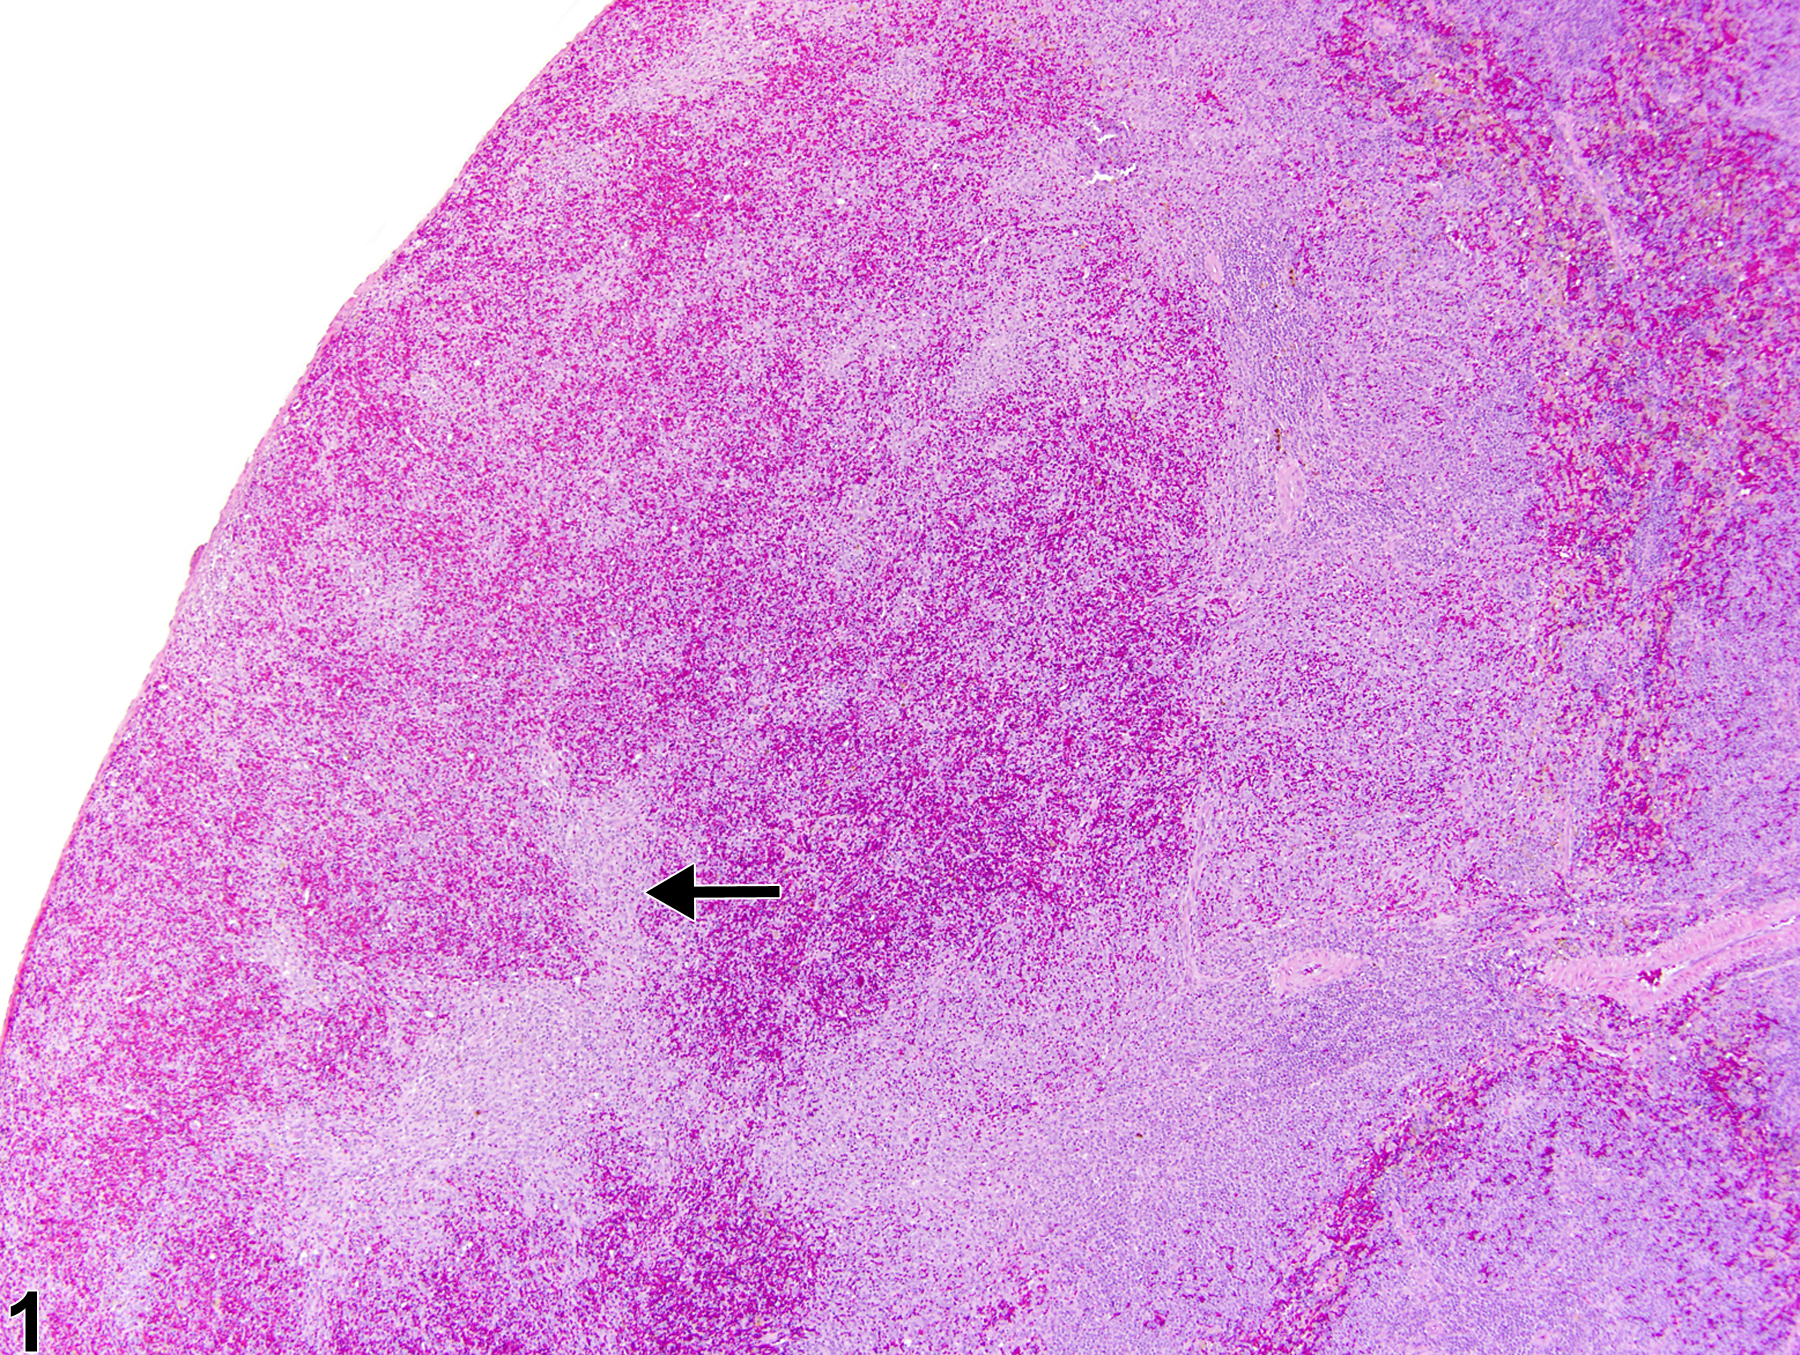 Image of hyperplasia, stromal cell in the spleen from a female F344/N rat in a chronic study